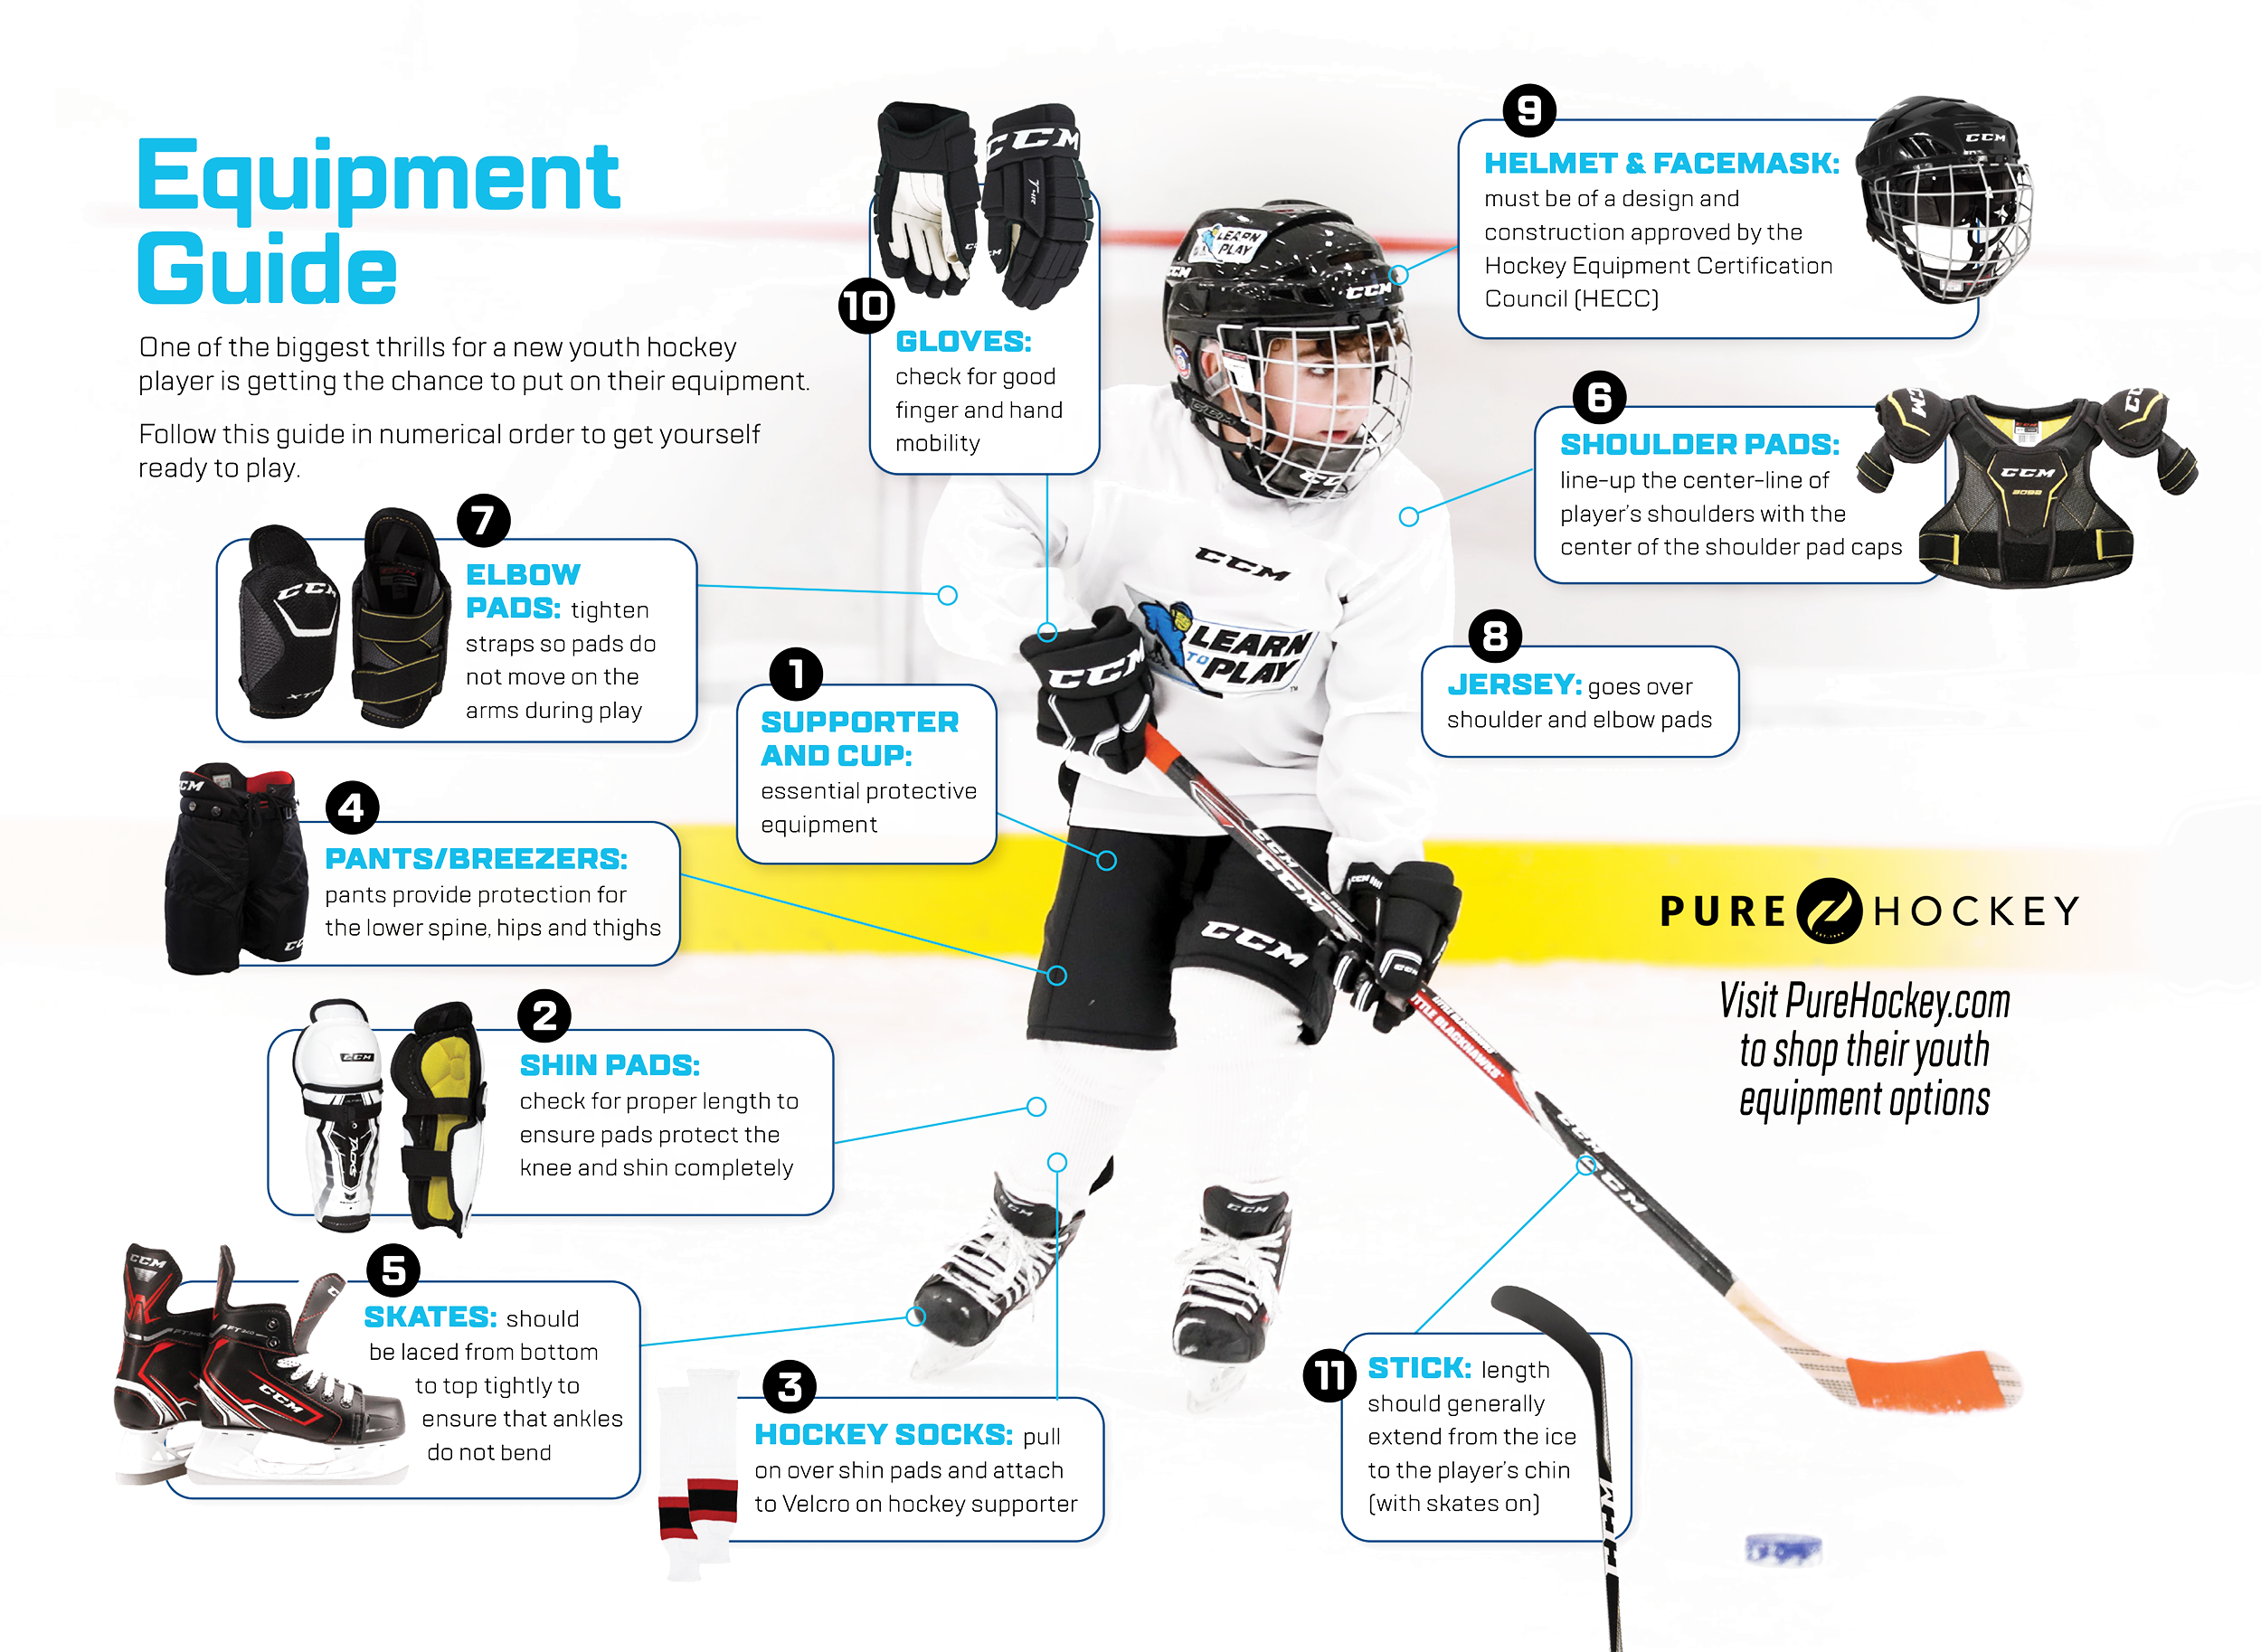 Tips for First-Time Hockey Equipment Buyers